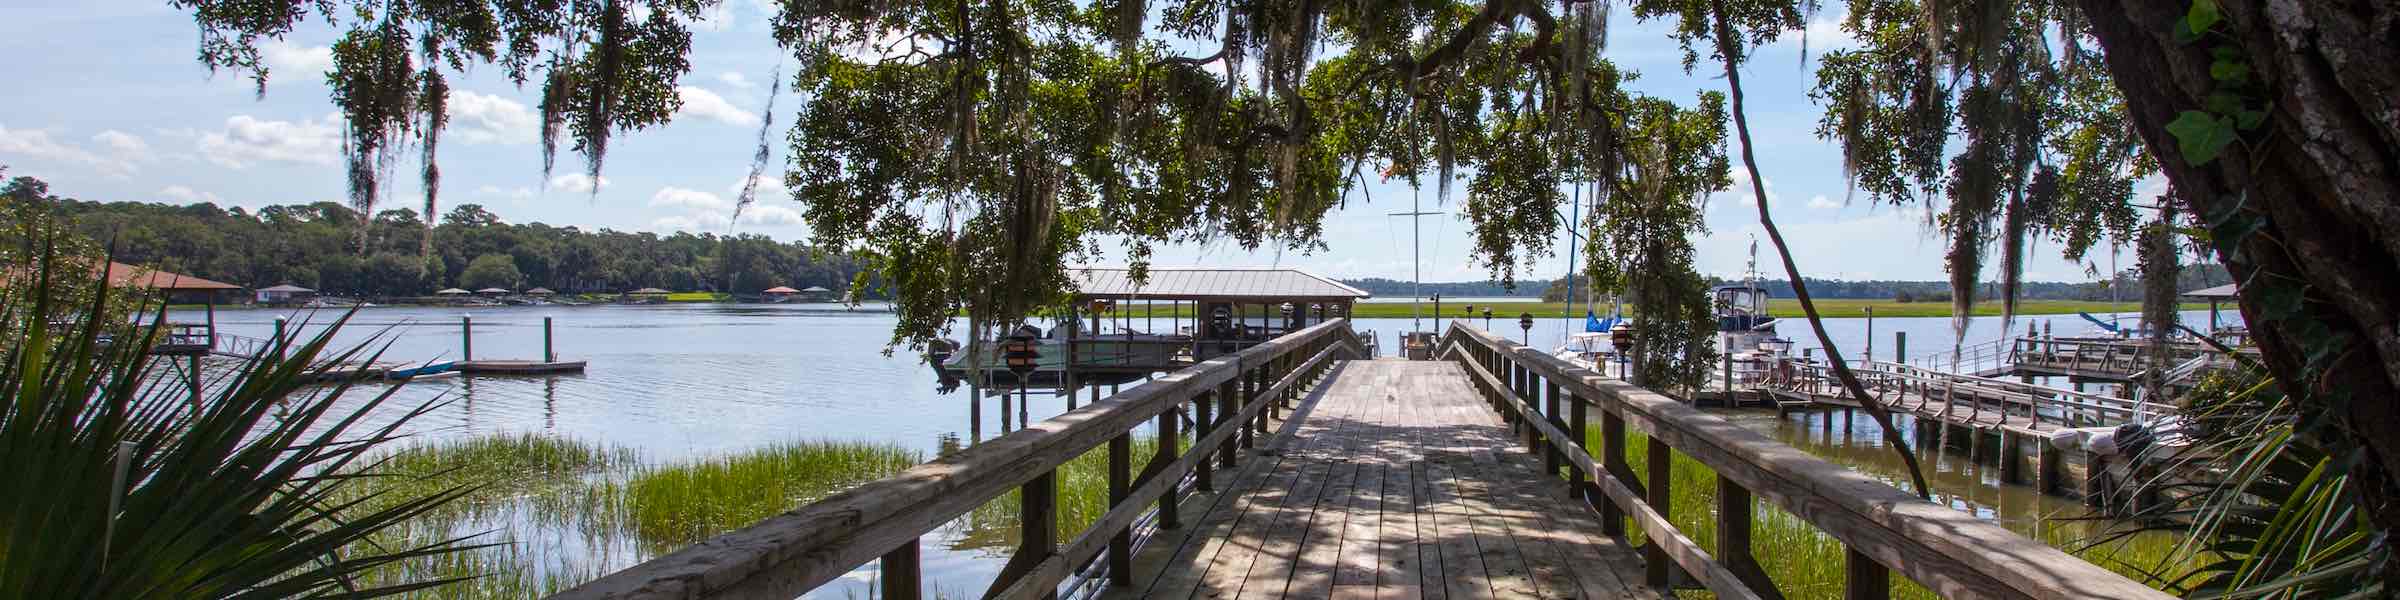 Jetty on the Skidaway River at Isle of Hope, a quiet residential suburb of Savannah.